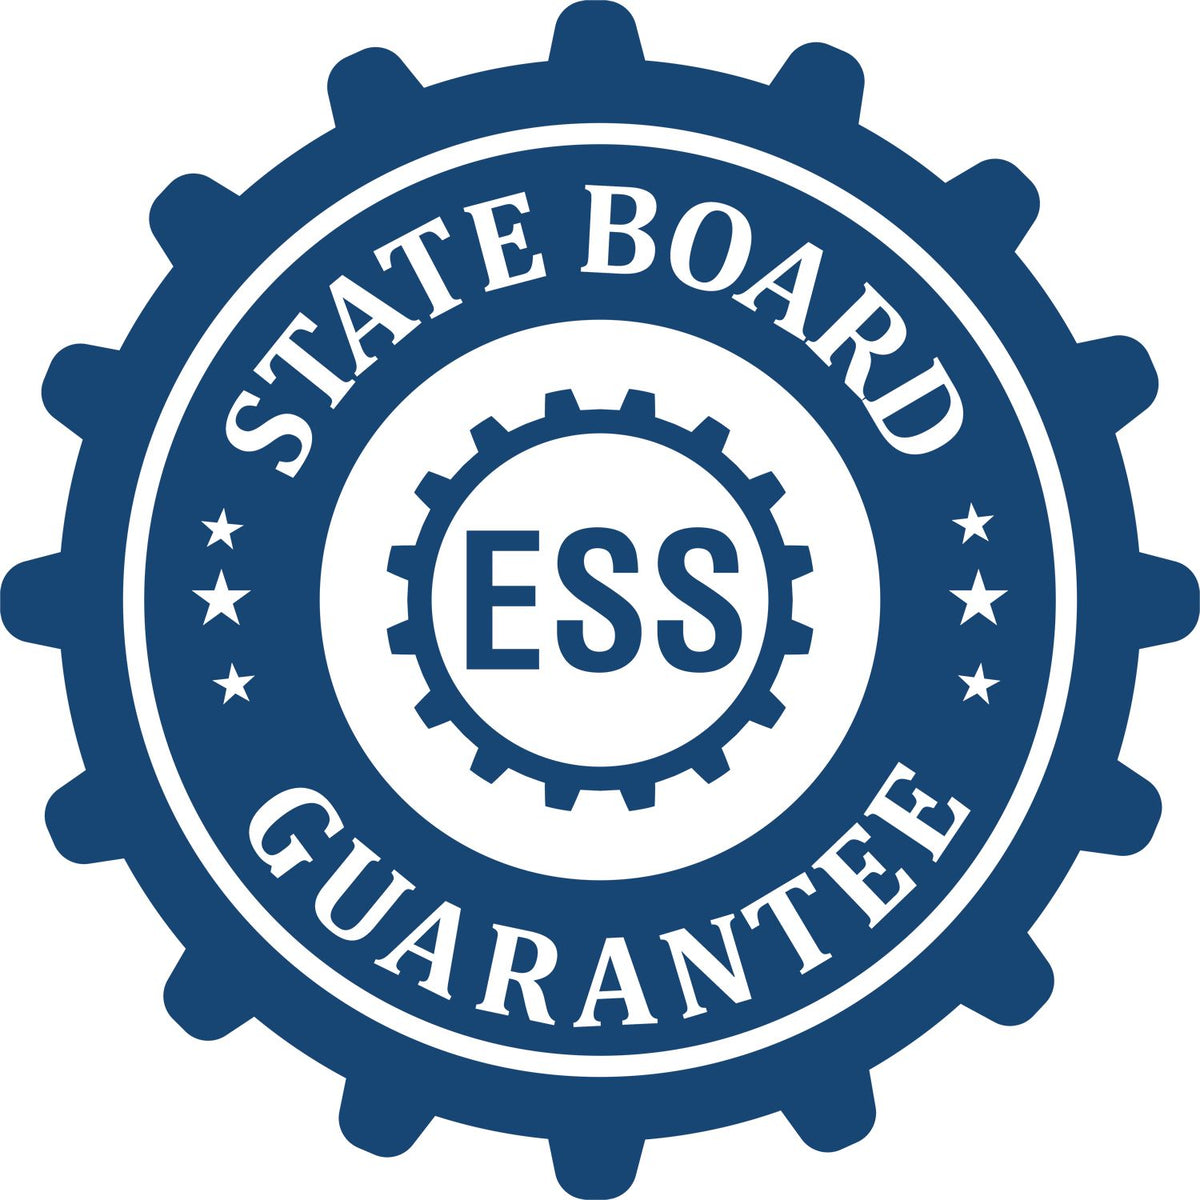 An emblem in a gear shape illustrating a state board guarantee for the Digital Alabama Geologist Stamp, Electronic Seal for Alabama Geologist